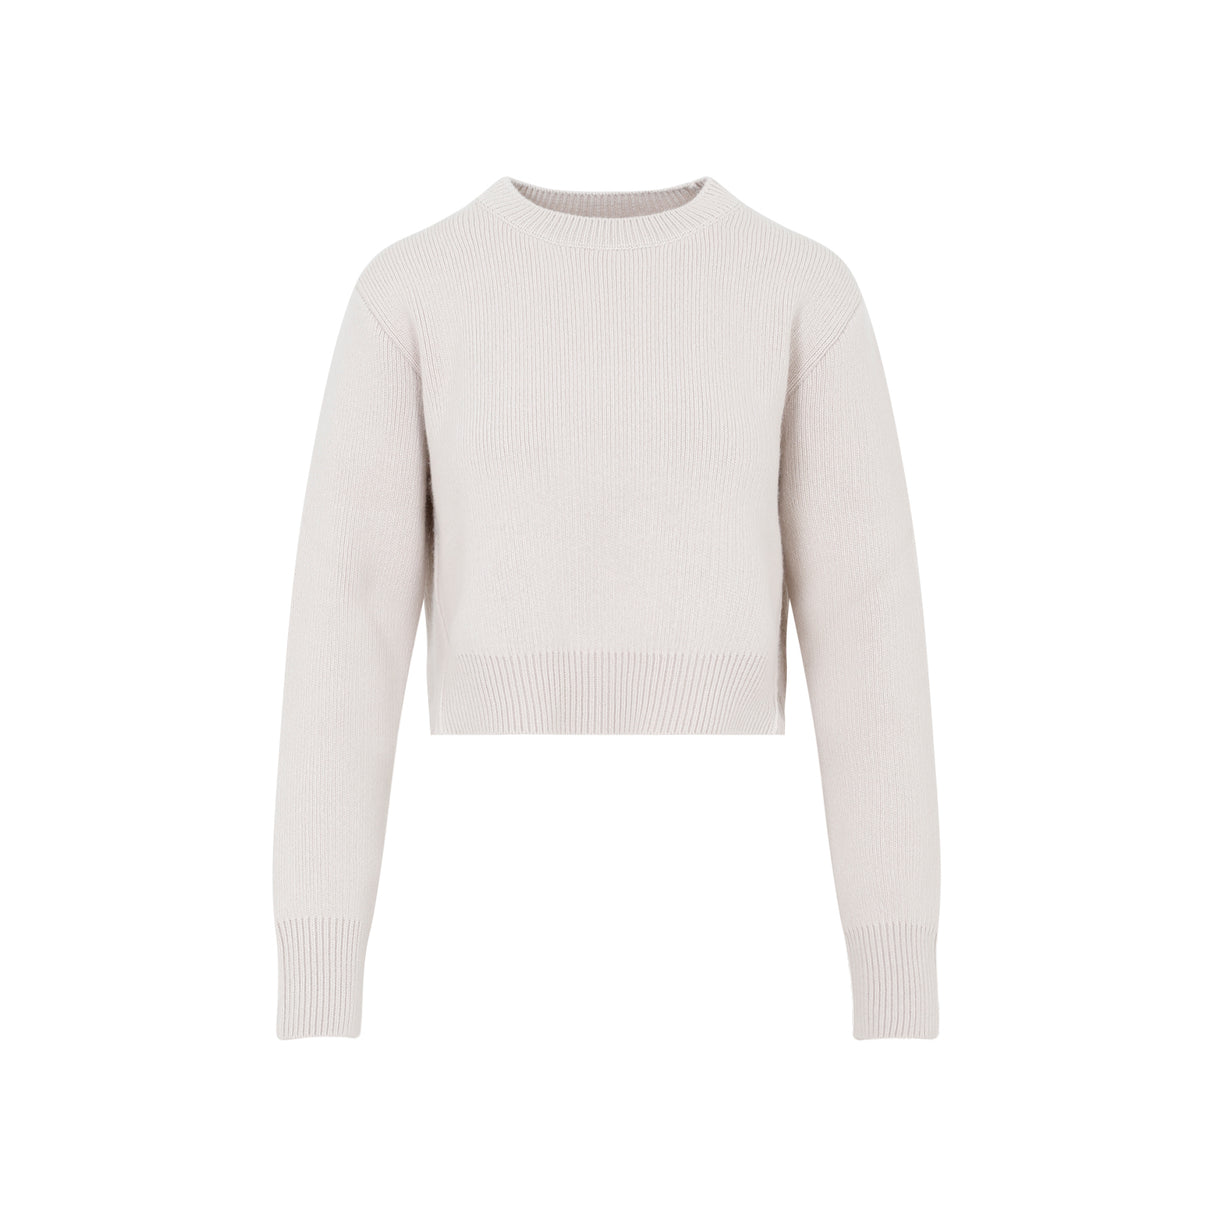 LANVIN Luxurious Beige Wool and Cashmere Sweater for Women